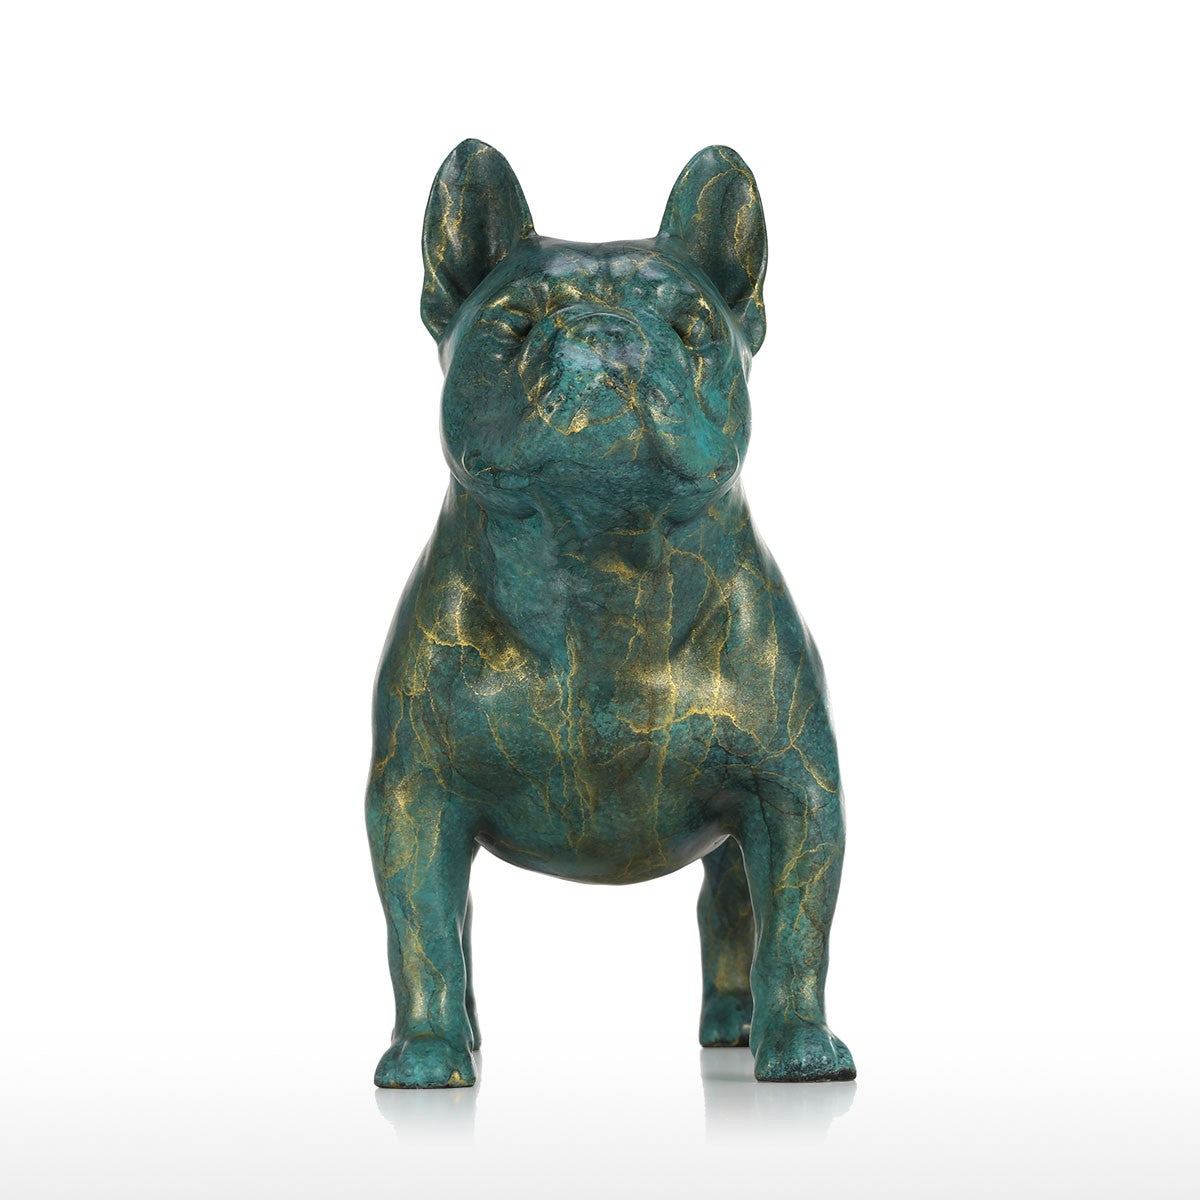 Luxury Christmas Ornaments and Luxury Christmas Decorations with French Bulldog Statue for Christmas Decorations